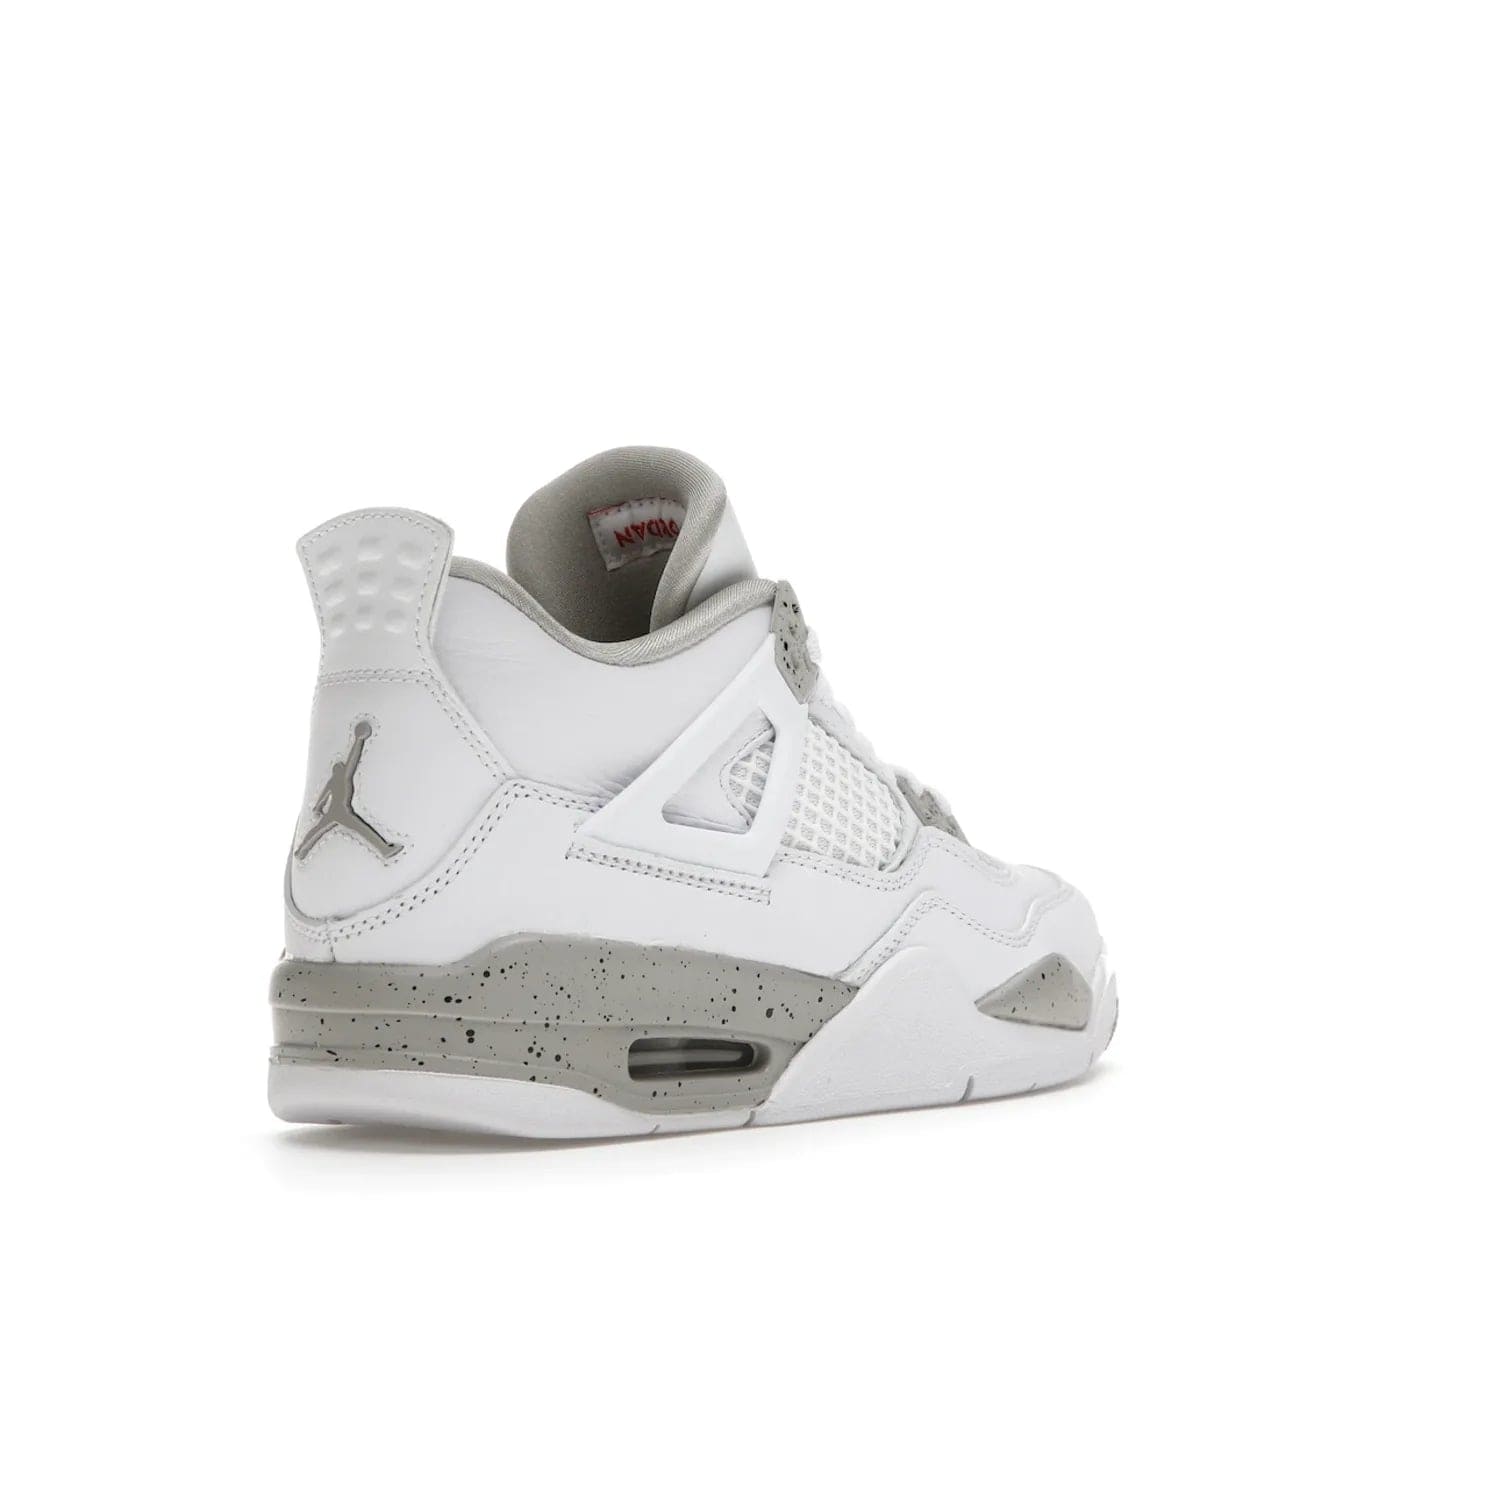 Jordan 4 Retro White Oreo (2021) (GS) - Image 32 - Only at www.BallersClubKickz.com - White Oreo Air Jordan 4 Retro 2021 GS - Iconic sneaker silhouette with white canvas upper, Tech Grey detailing, and Fire Red accents. Available July 2021.